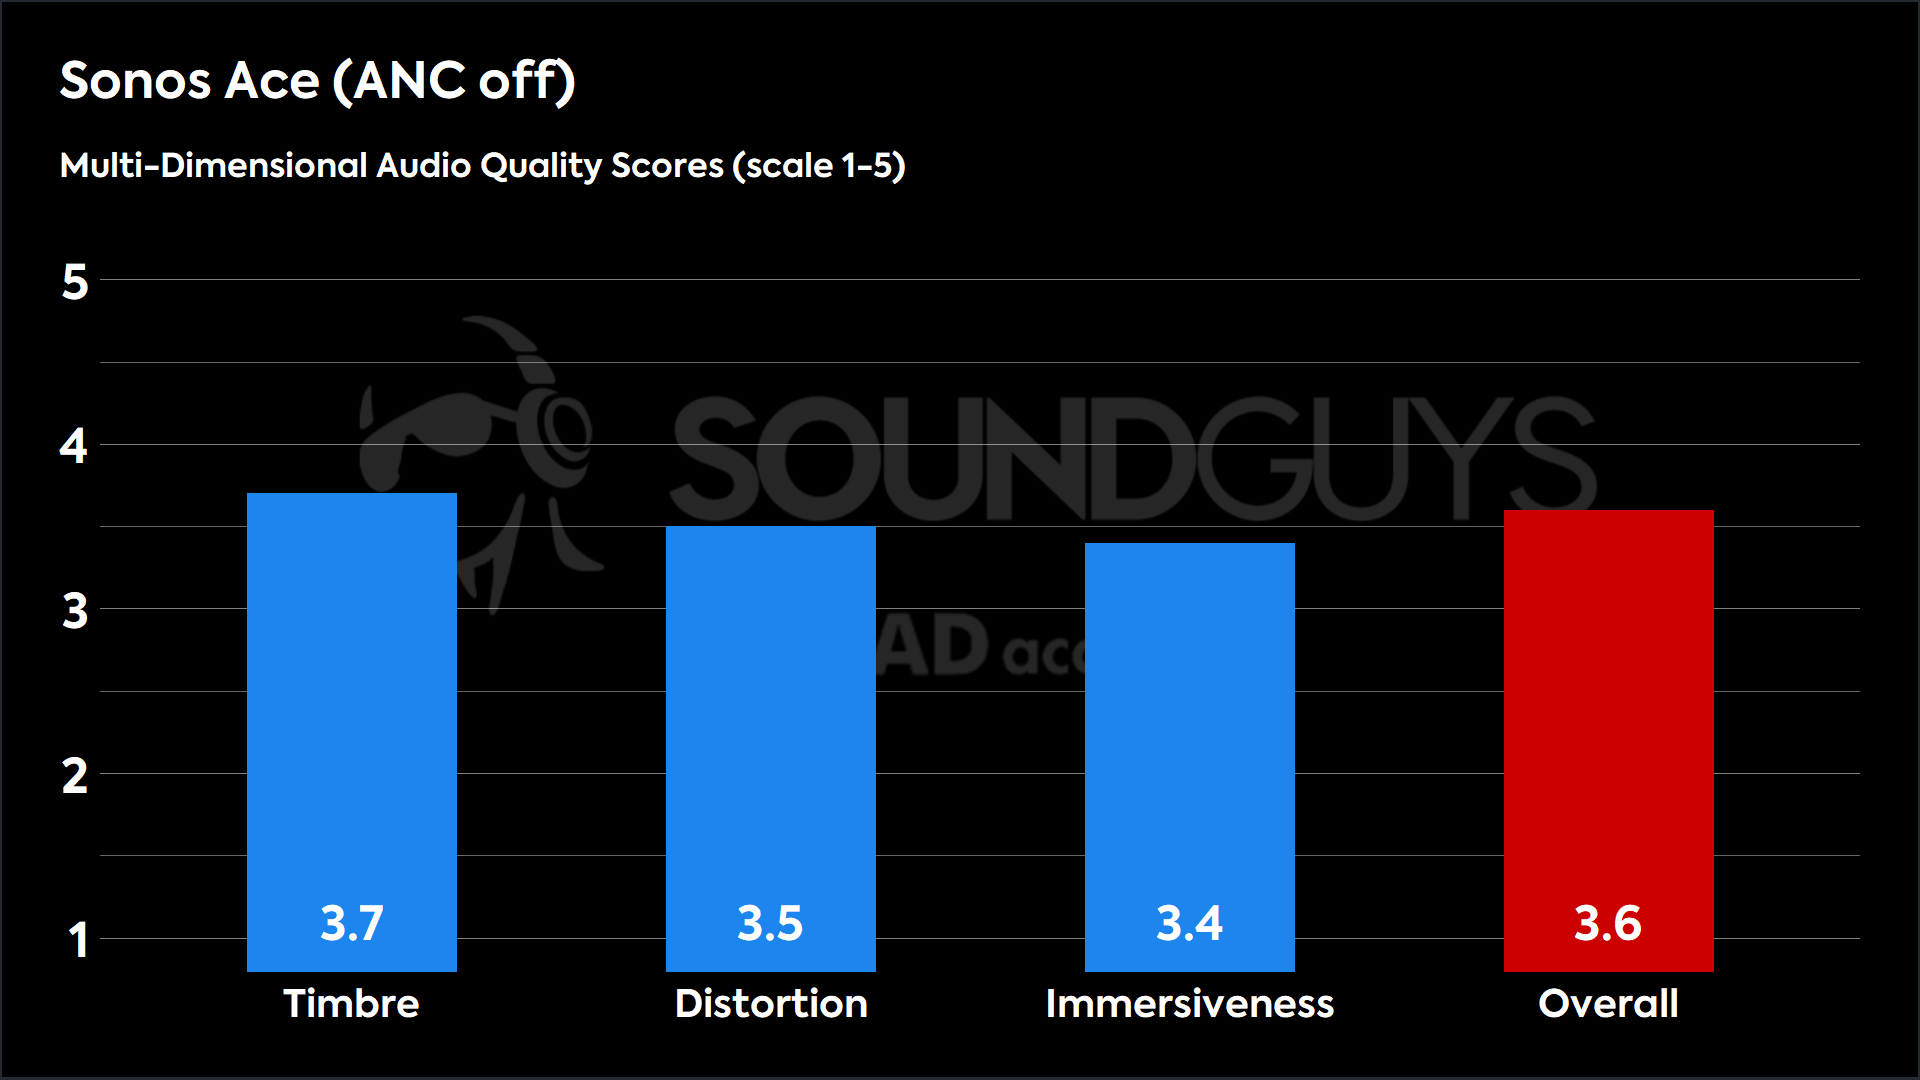 This chart shows the MDAQS results for the Sonos Ace in ANC off mode. The Timbre score is 3.7, The Distortion score is 3.5, the Immersiveness score is 3.4, and the Overall Score is 3.6).